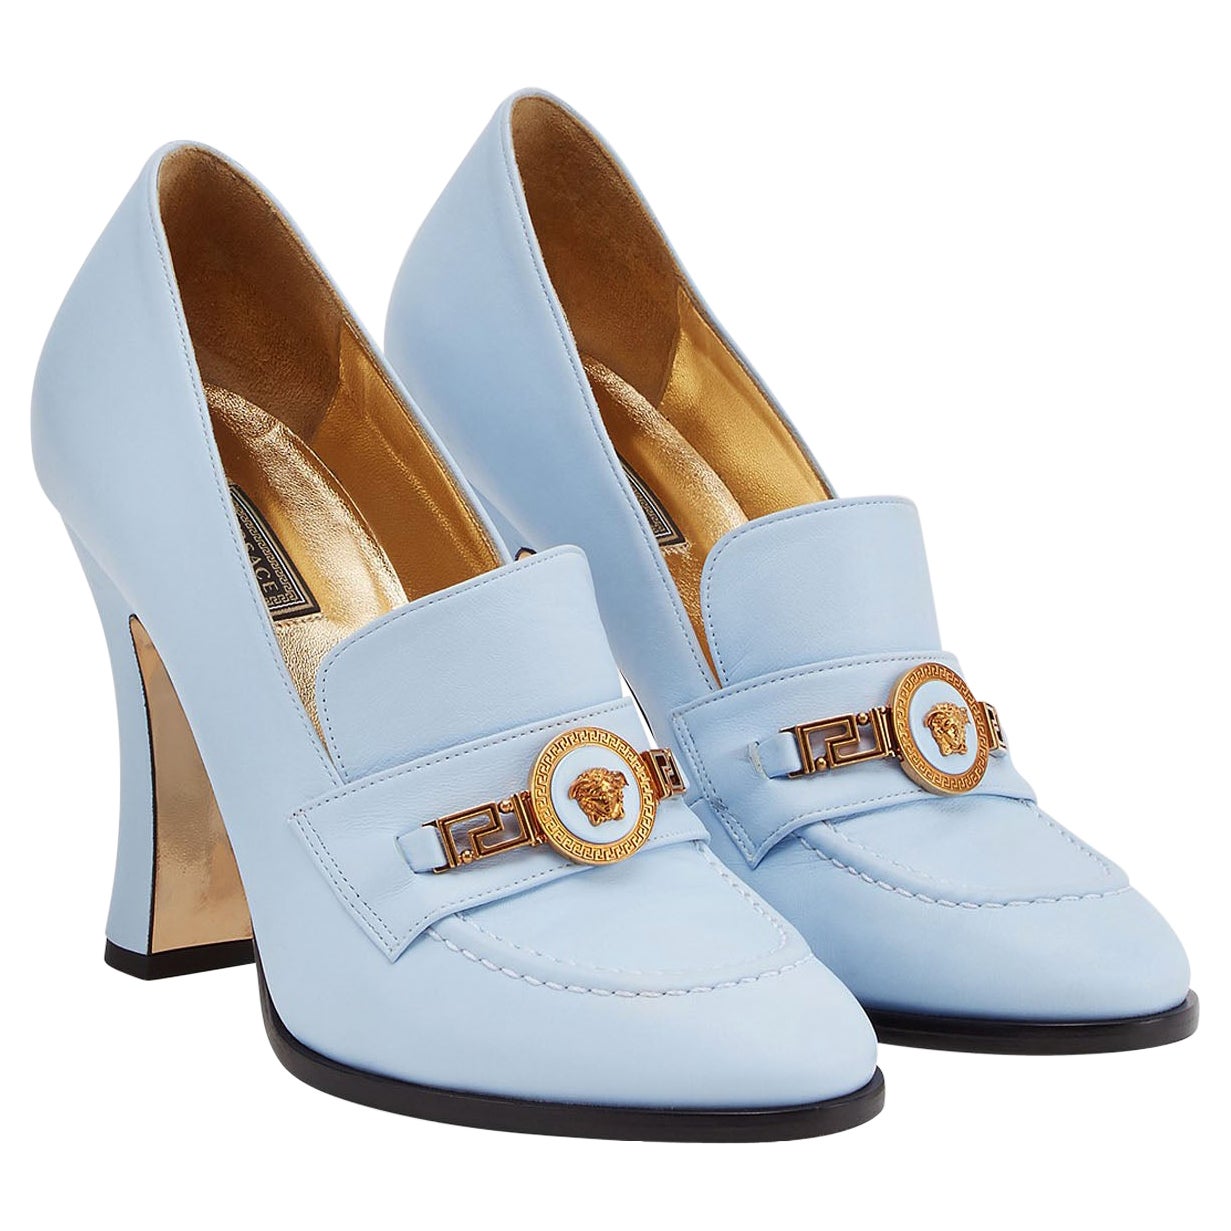 New Versace Runway S/S 2018 Baby Blue Lamb Leather Medusa Pumps Shoes 37.5